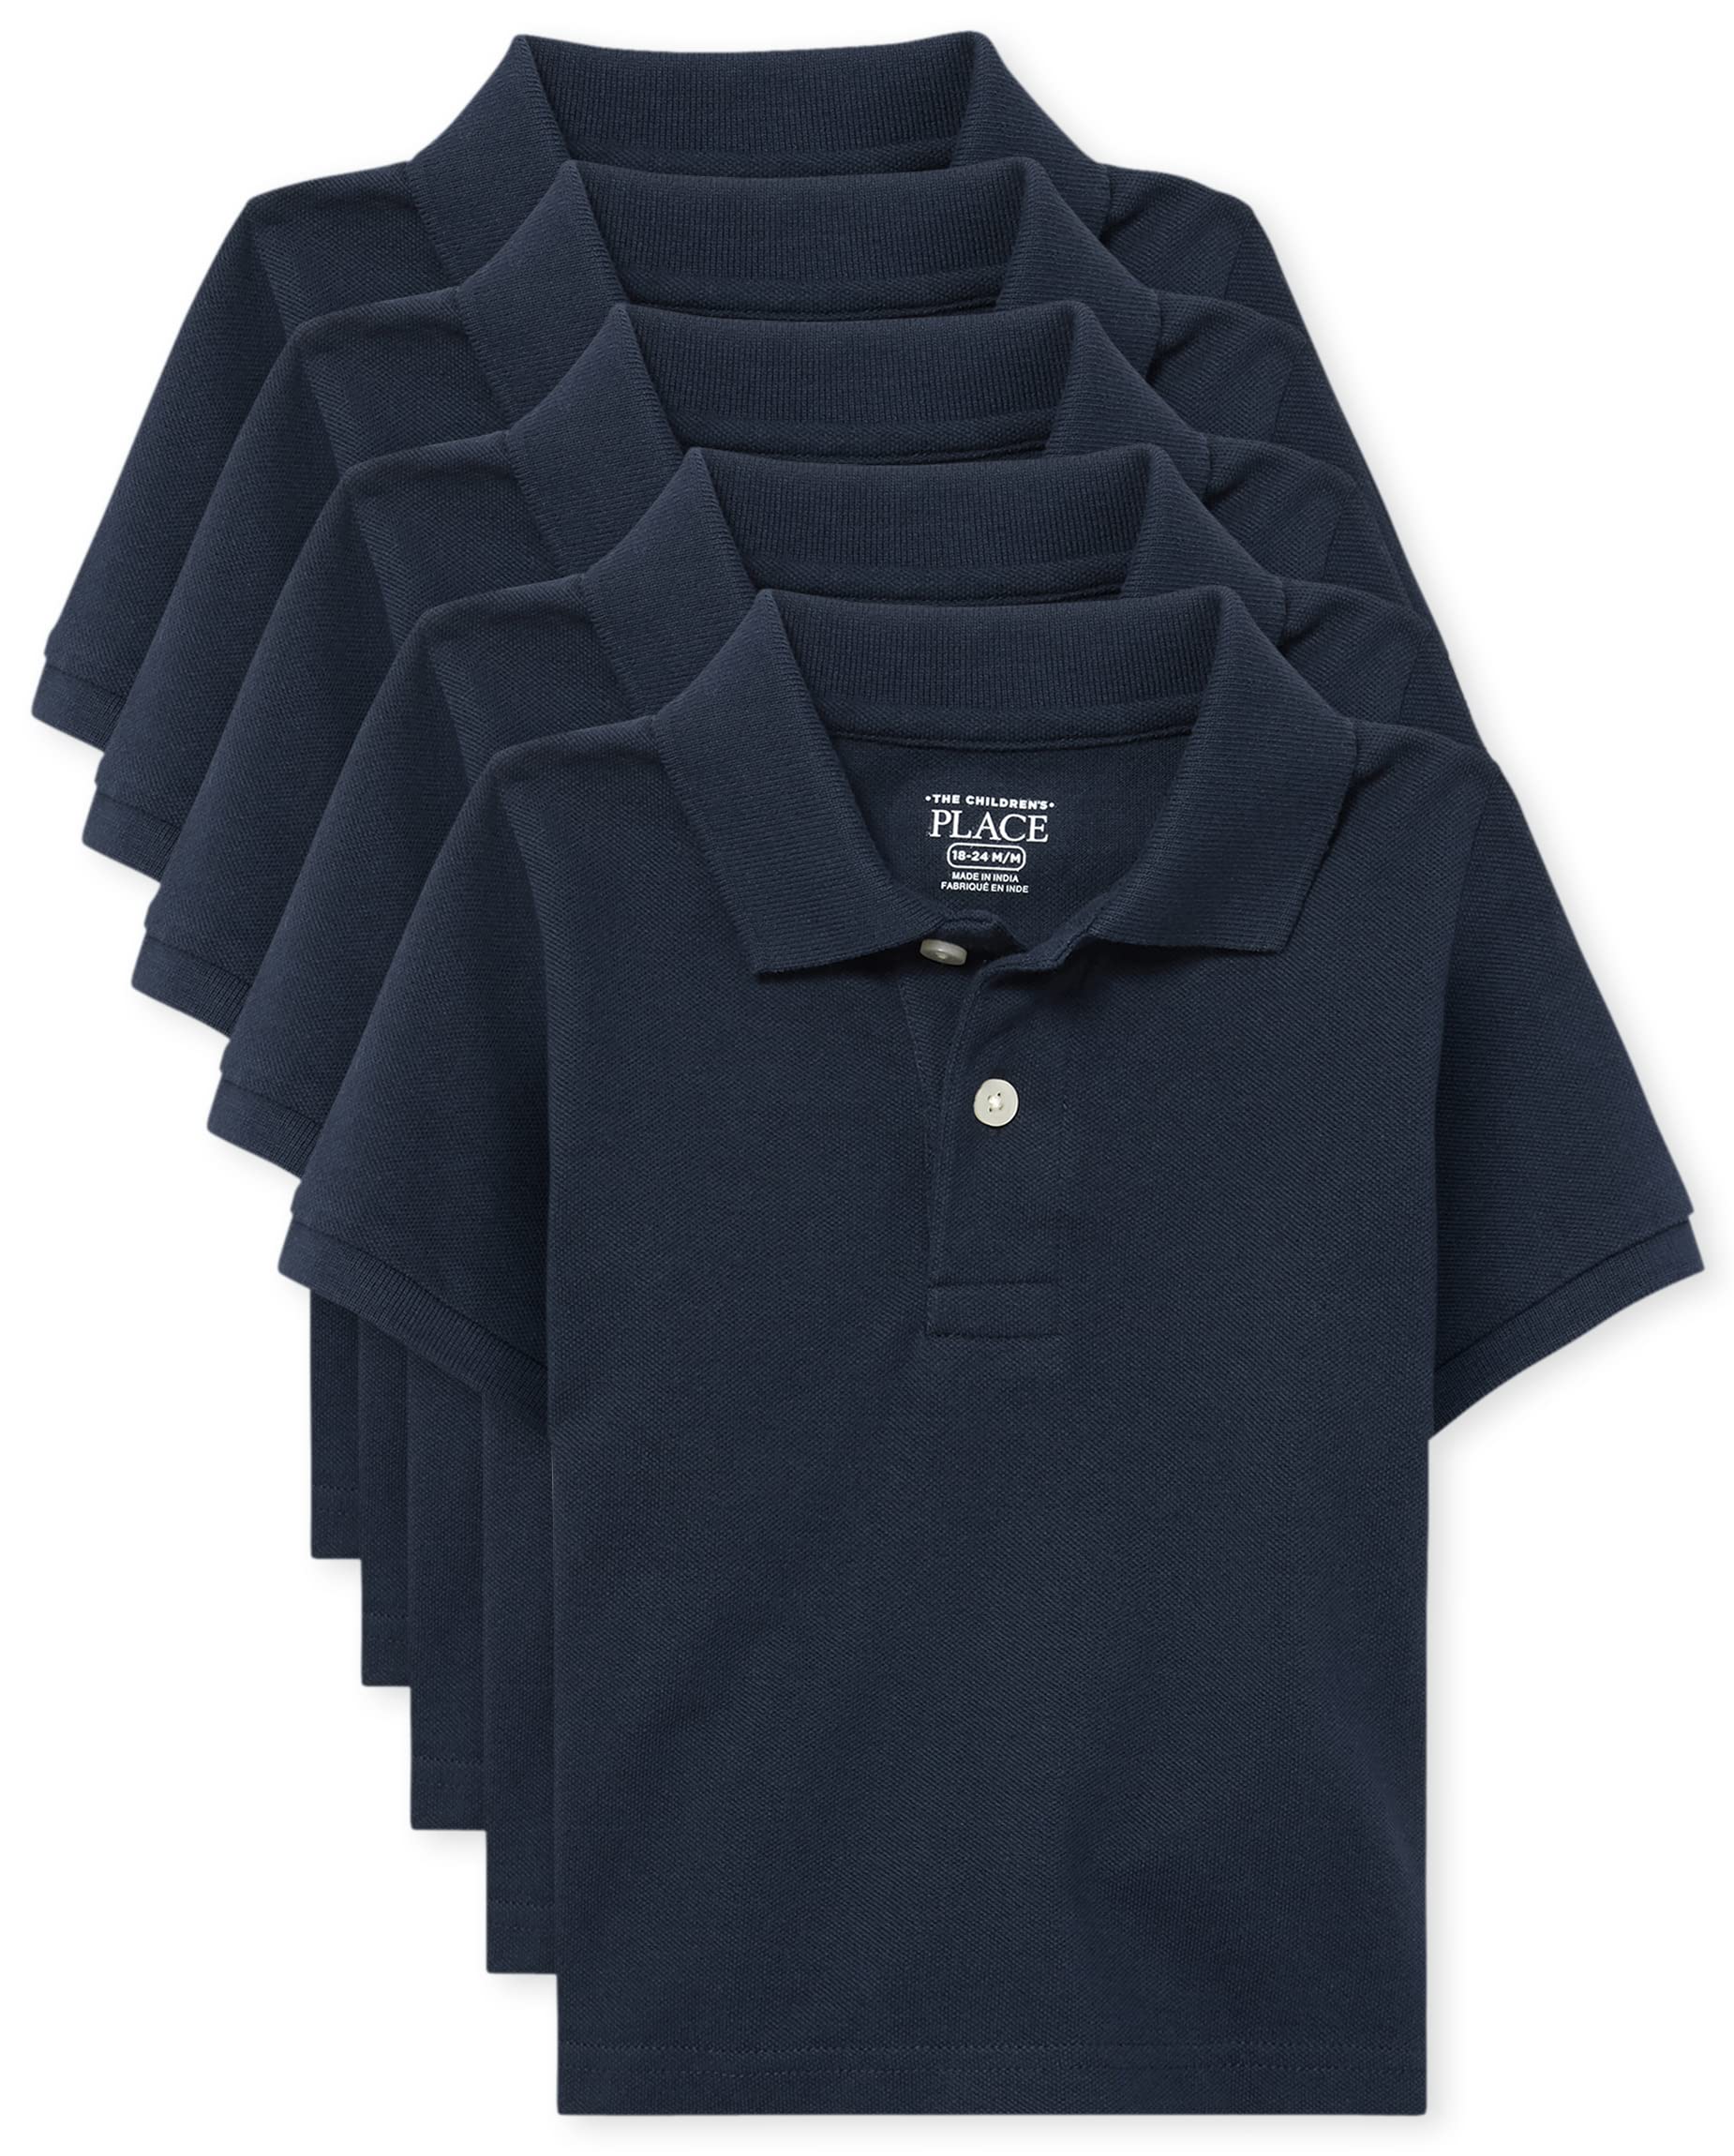 The Children's Place baby boys Multipack Short Sleeve Pique Polos